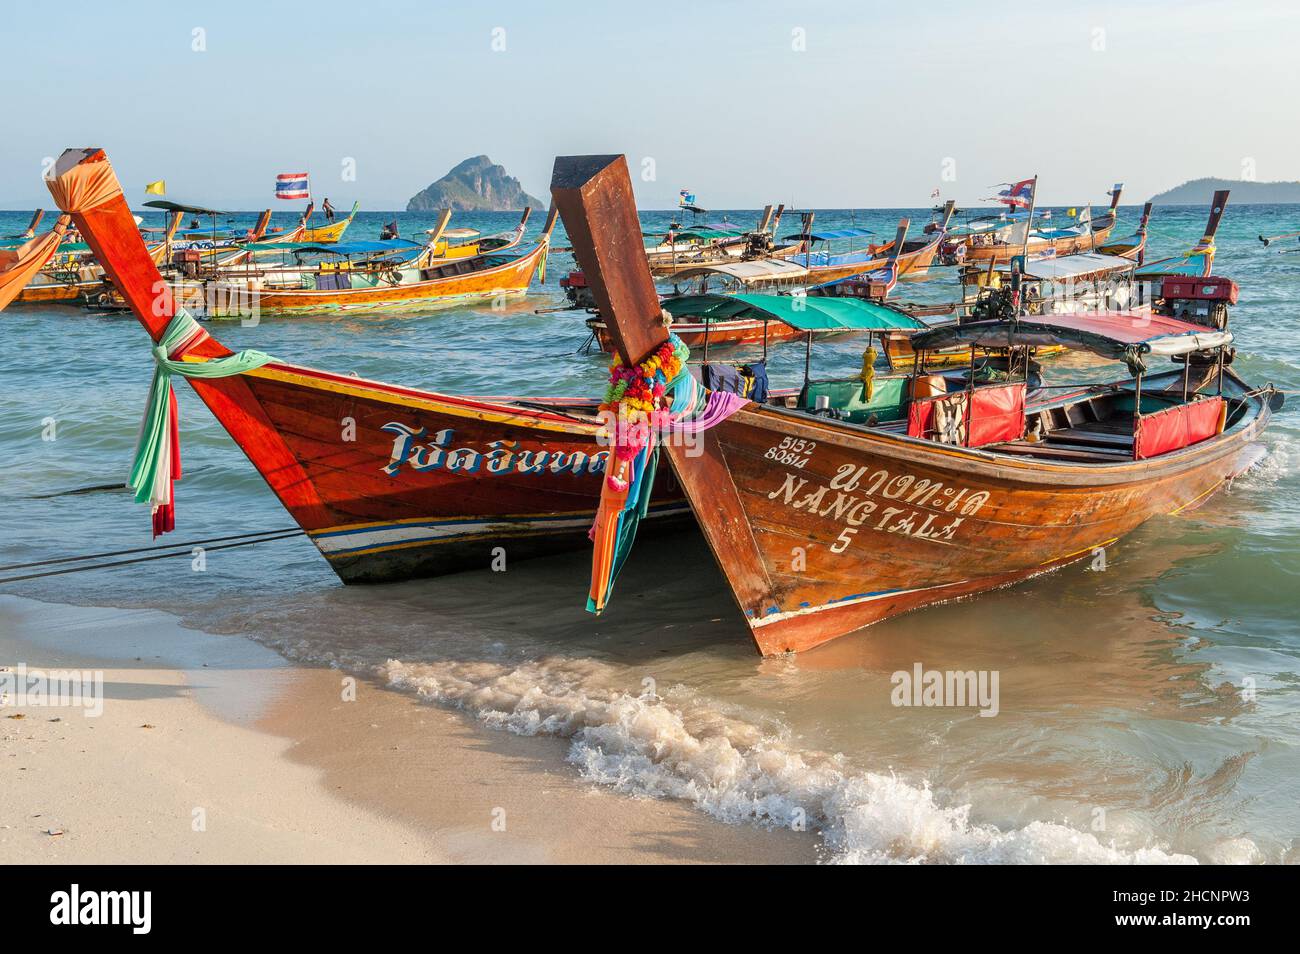 Longtail boats at Laem Tong Beach on Phi Phi Islands. These tropical islands are a popular tour destination from Phuket and Krabi in Thailand. Stock Photo